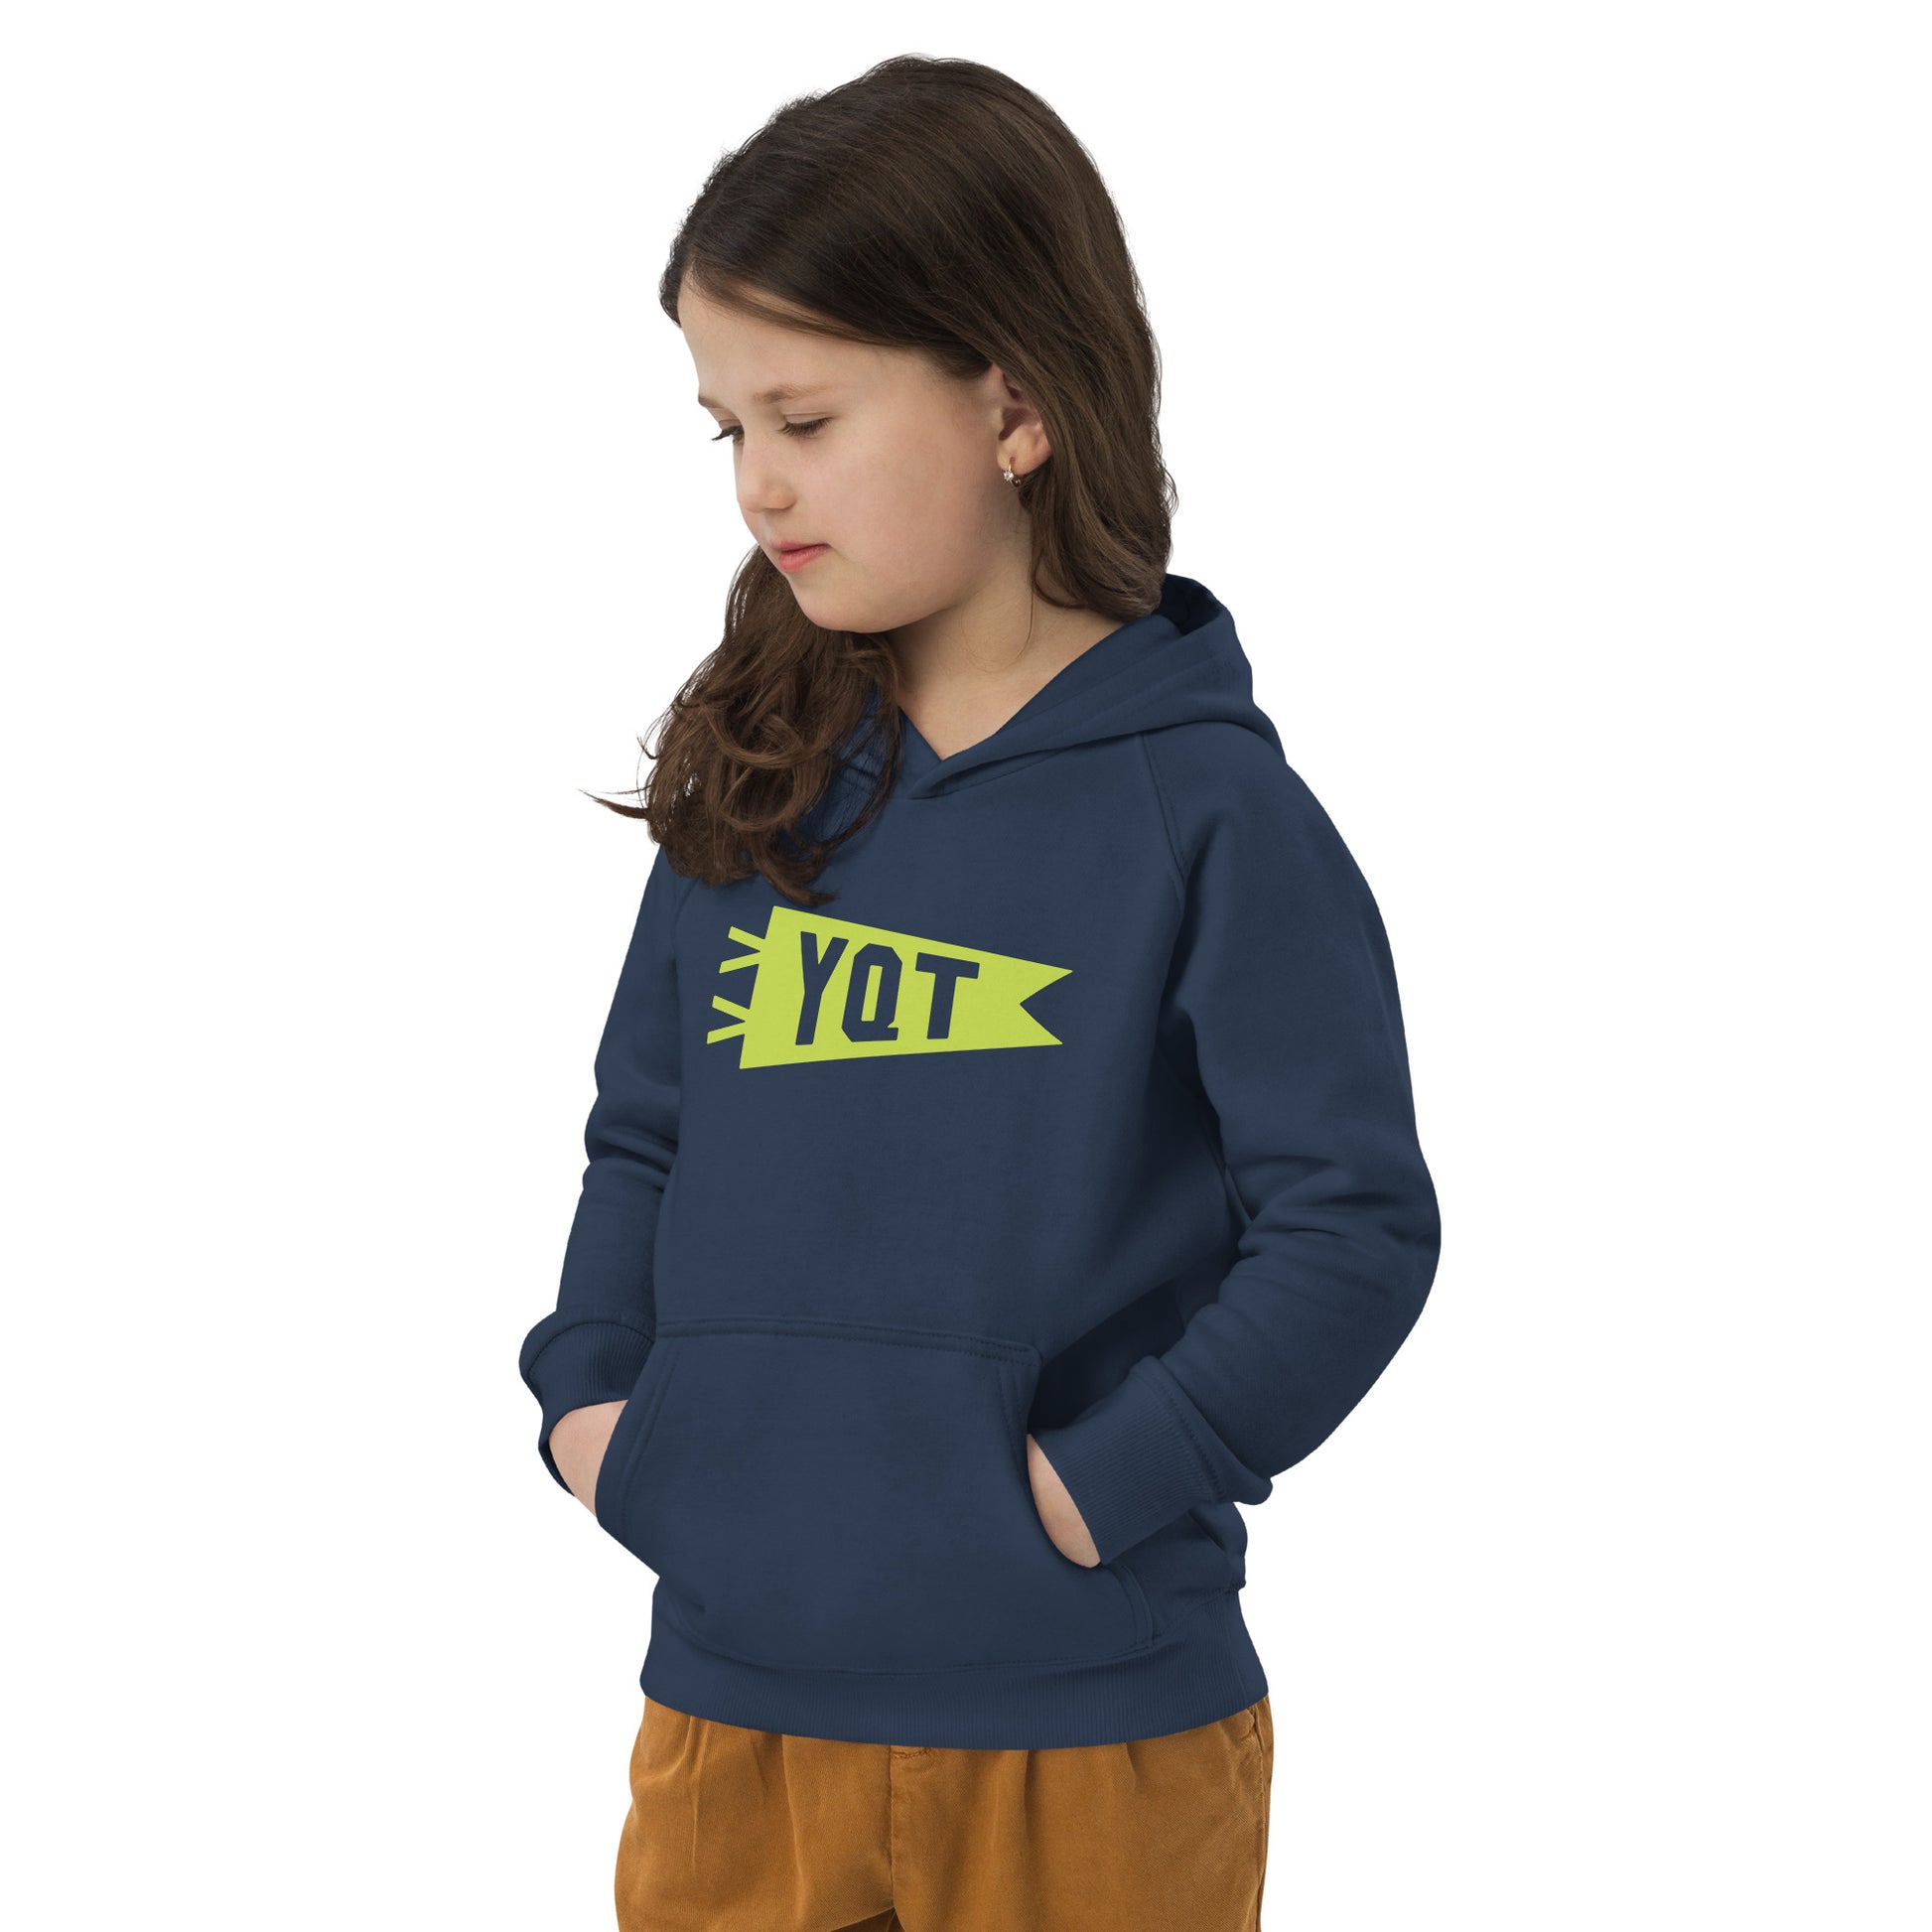 Kid's Sustainable Hoodie - Green Graphic • YQT Thunder Bay • YHM Designs - Image 05